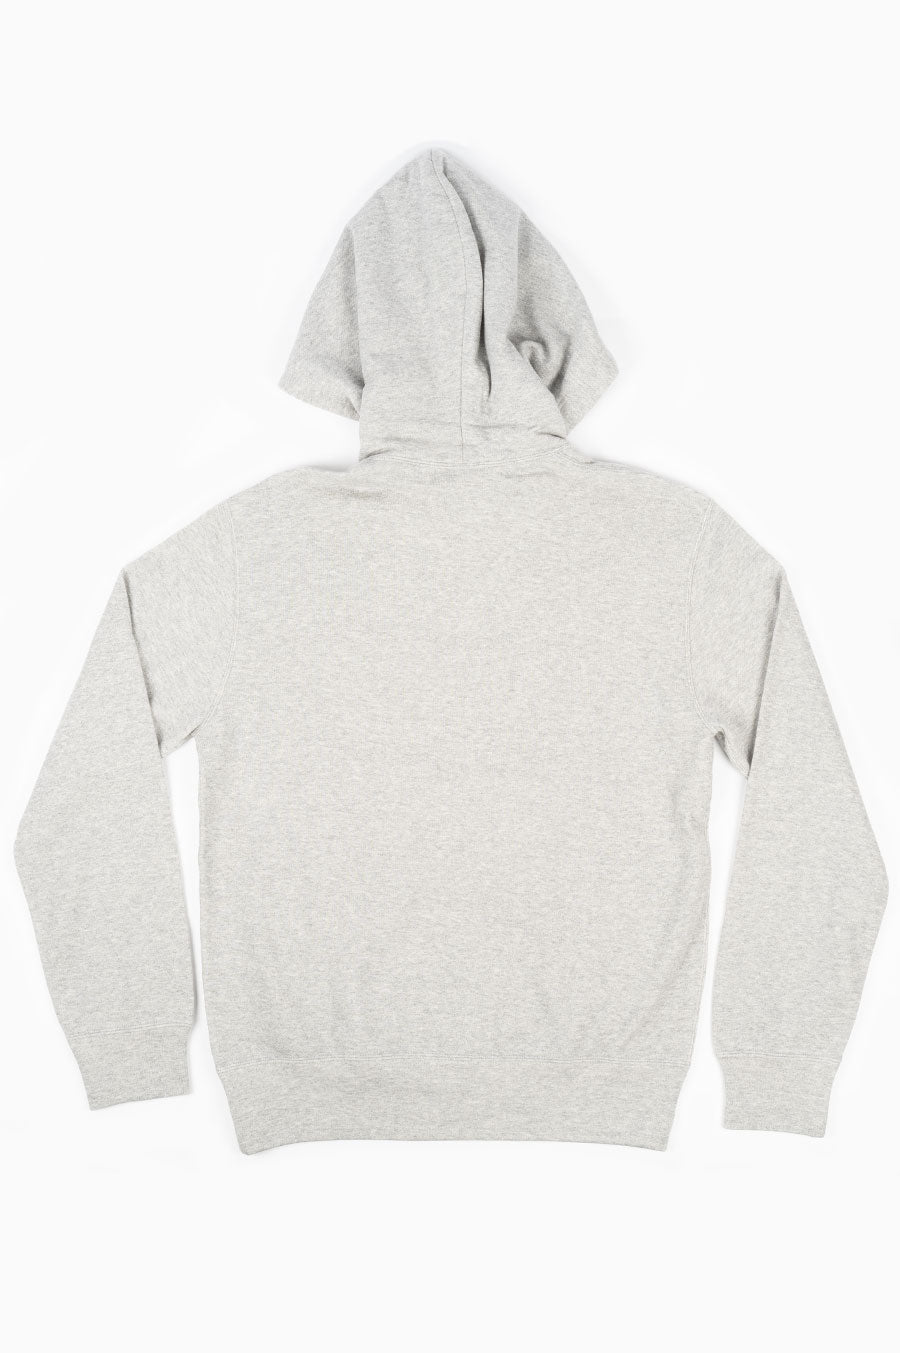 Comme des Garcons Play Red Heart Hoodie Grey